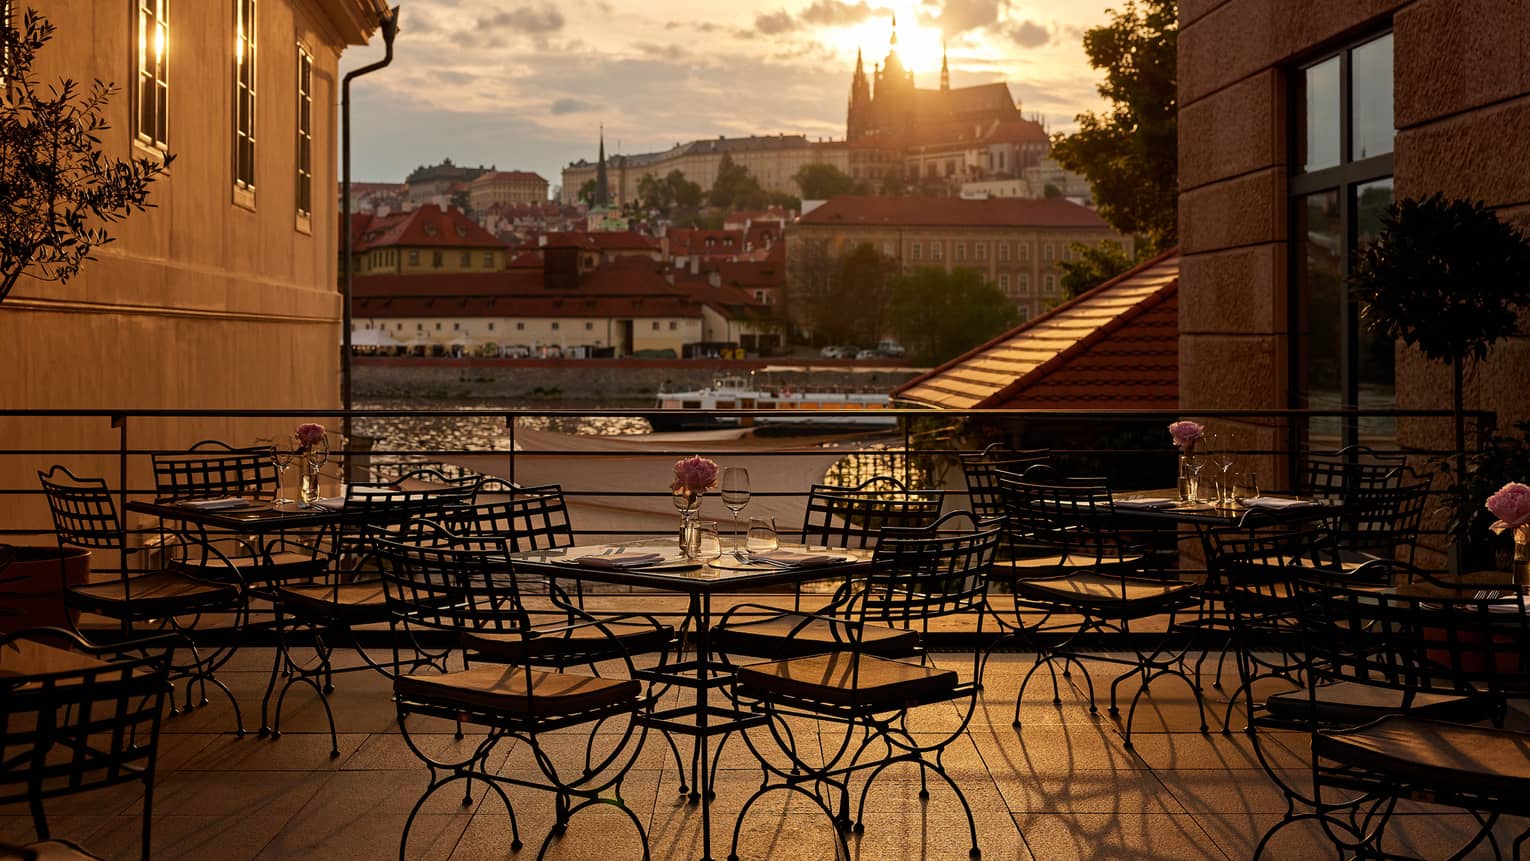 Restaurant terrace with black bistro dining tables with views of the Vltava River and Prague Castle at sunset